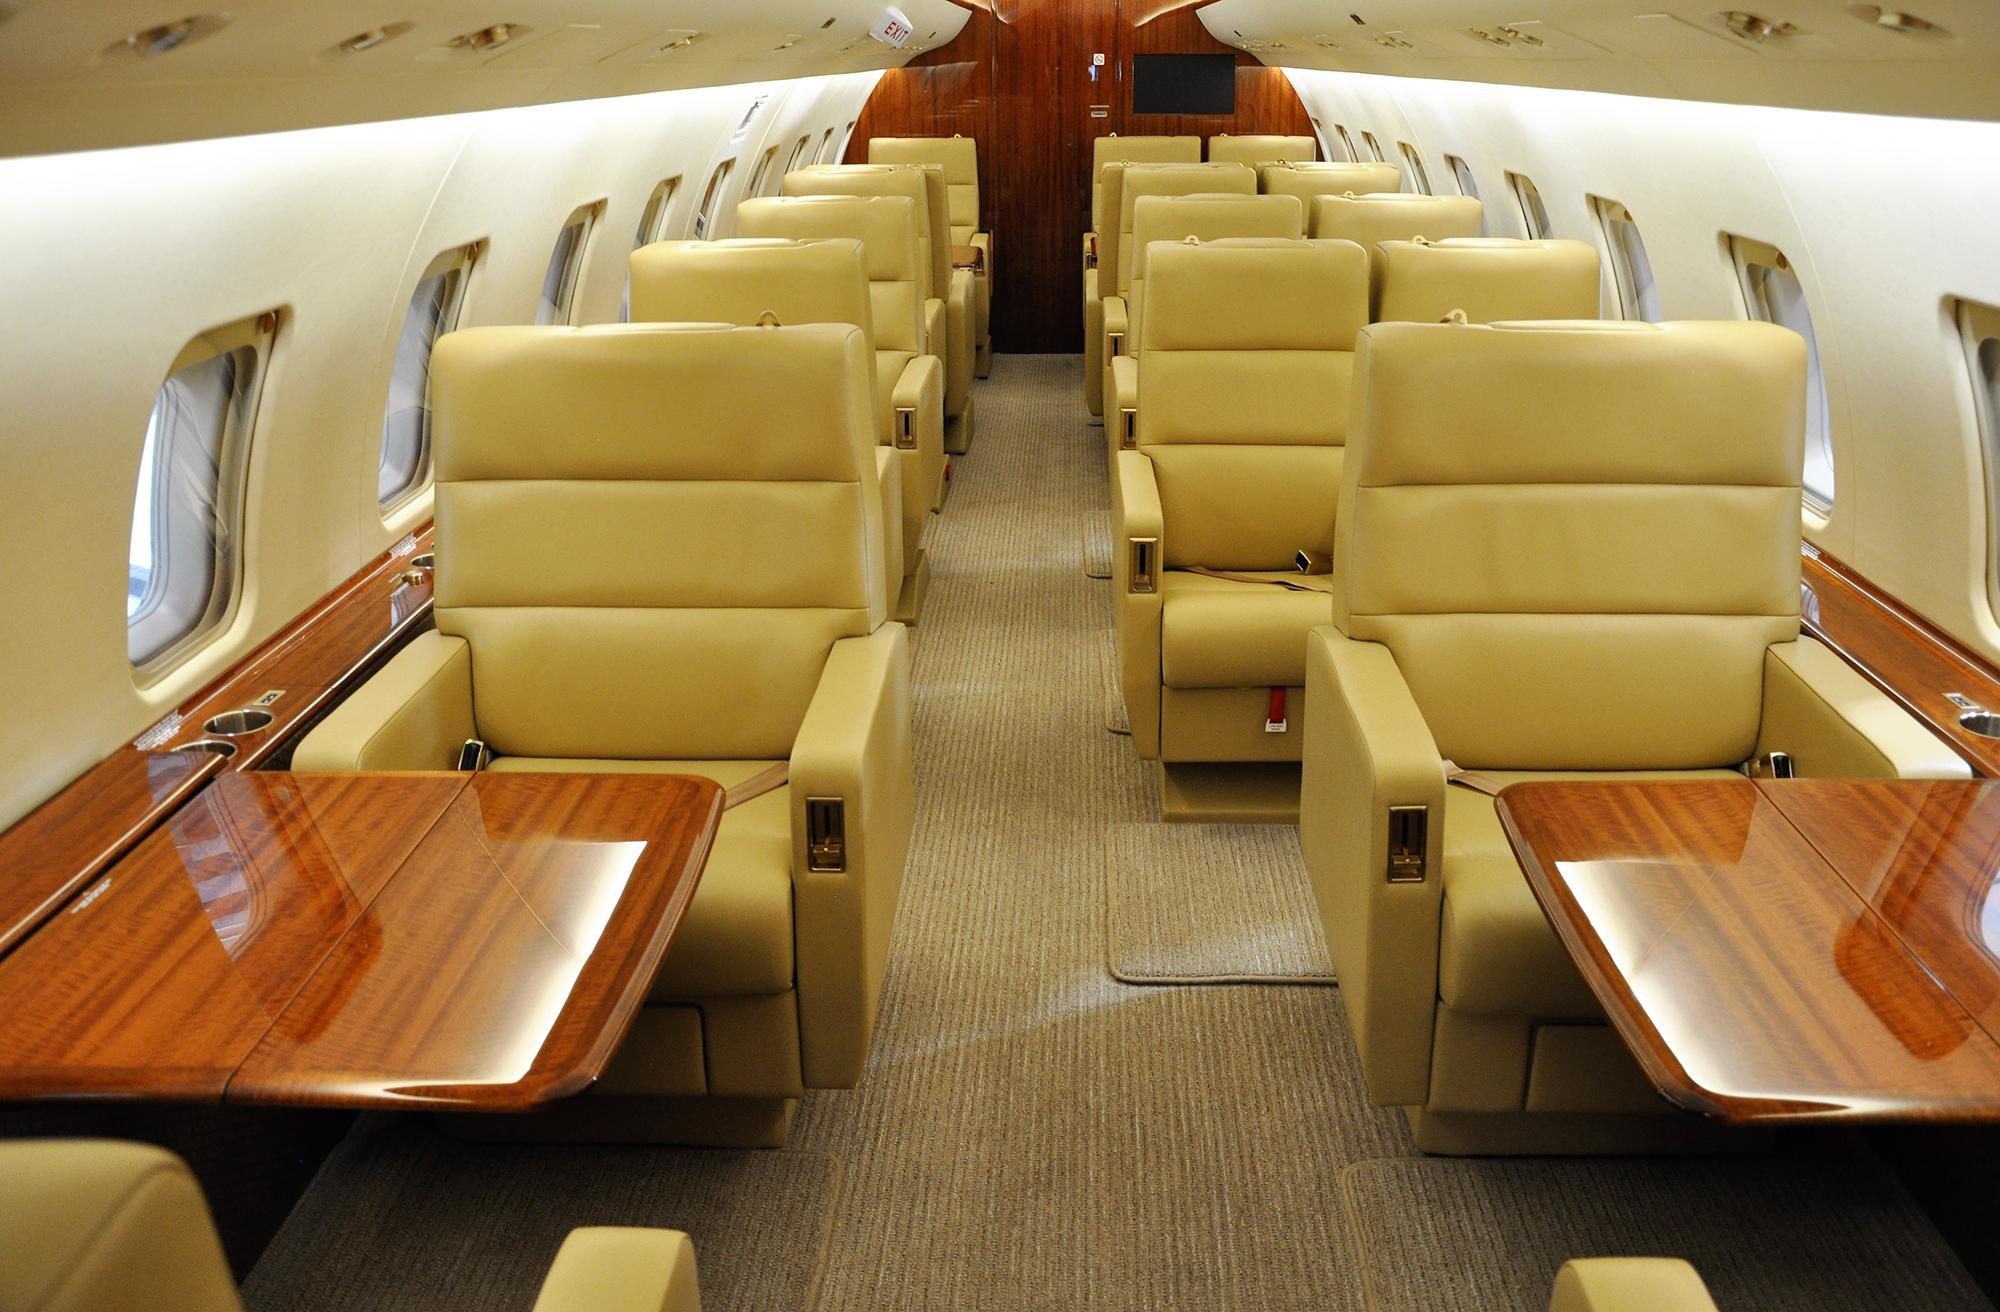 Flying Colours Corp has received many inquiries for corporate shuttle configurations.